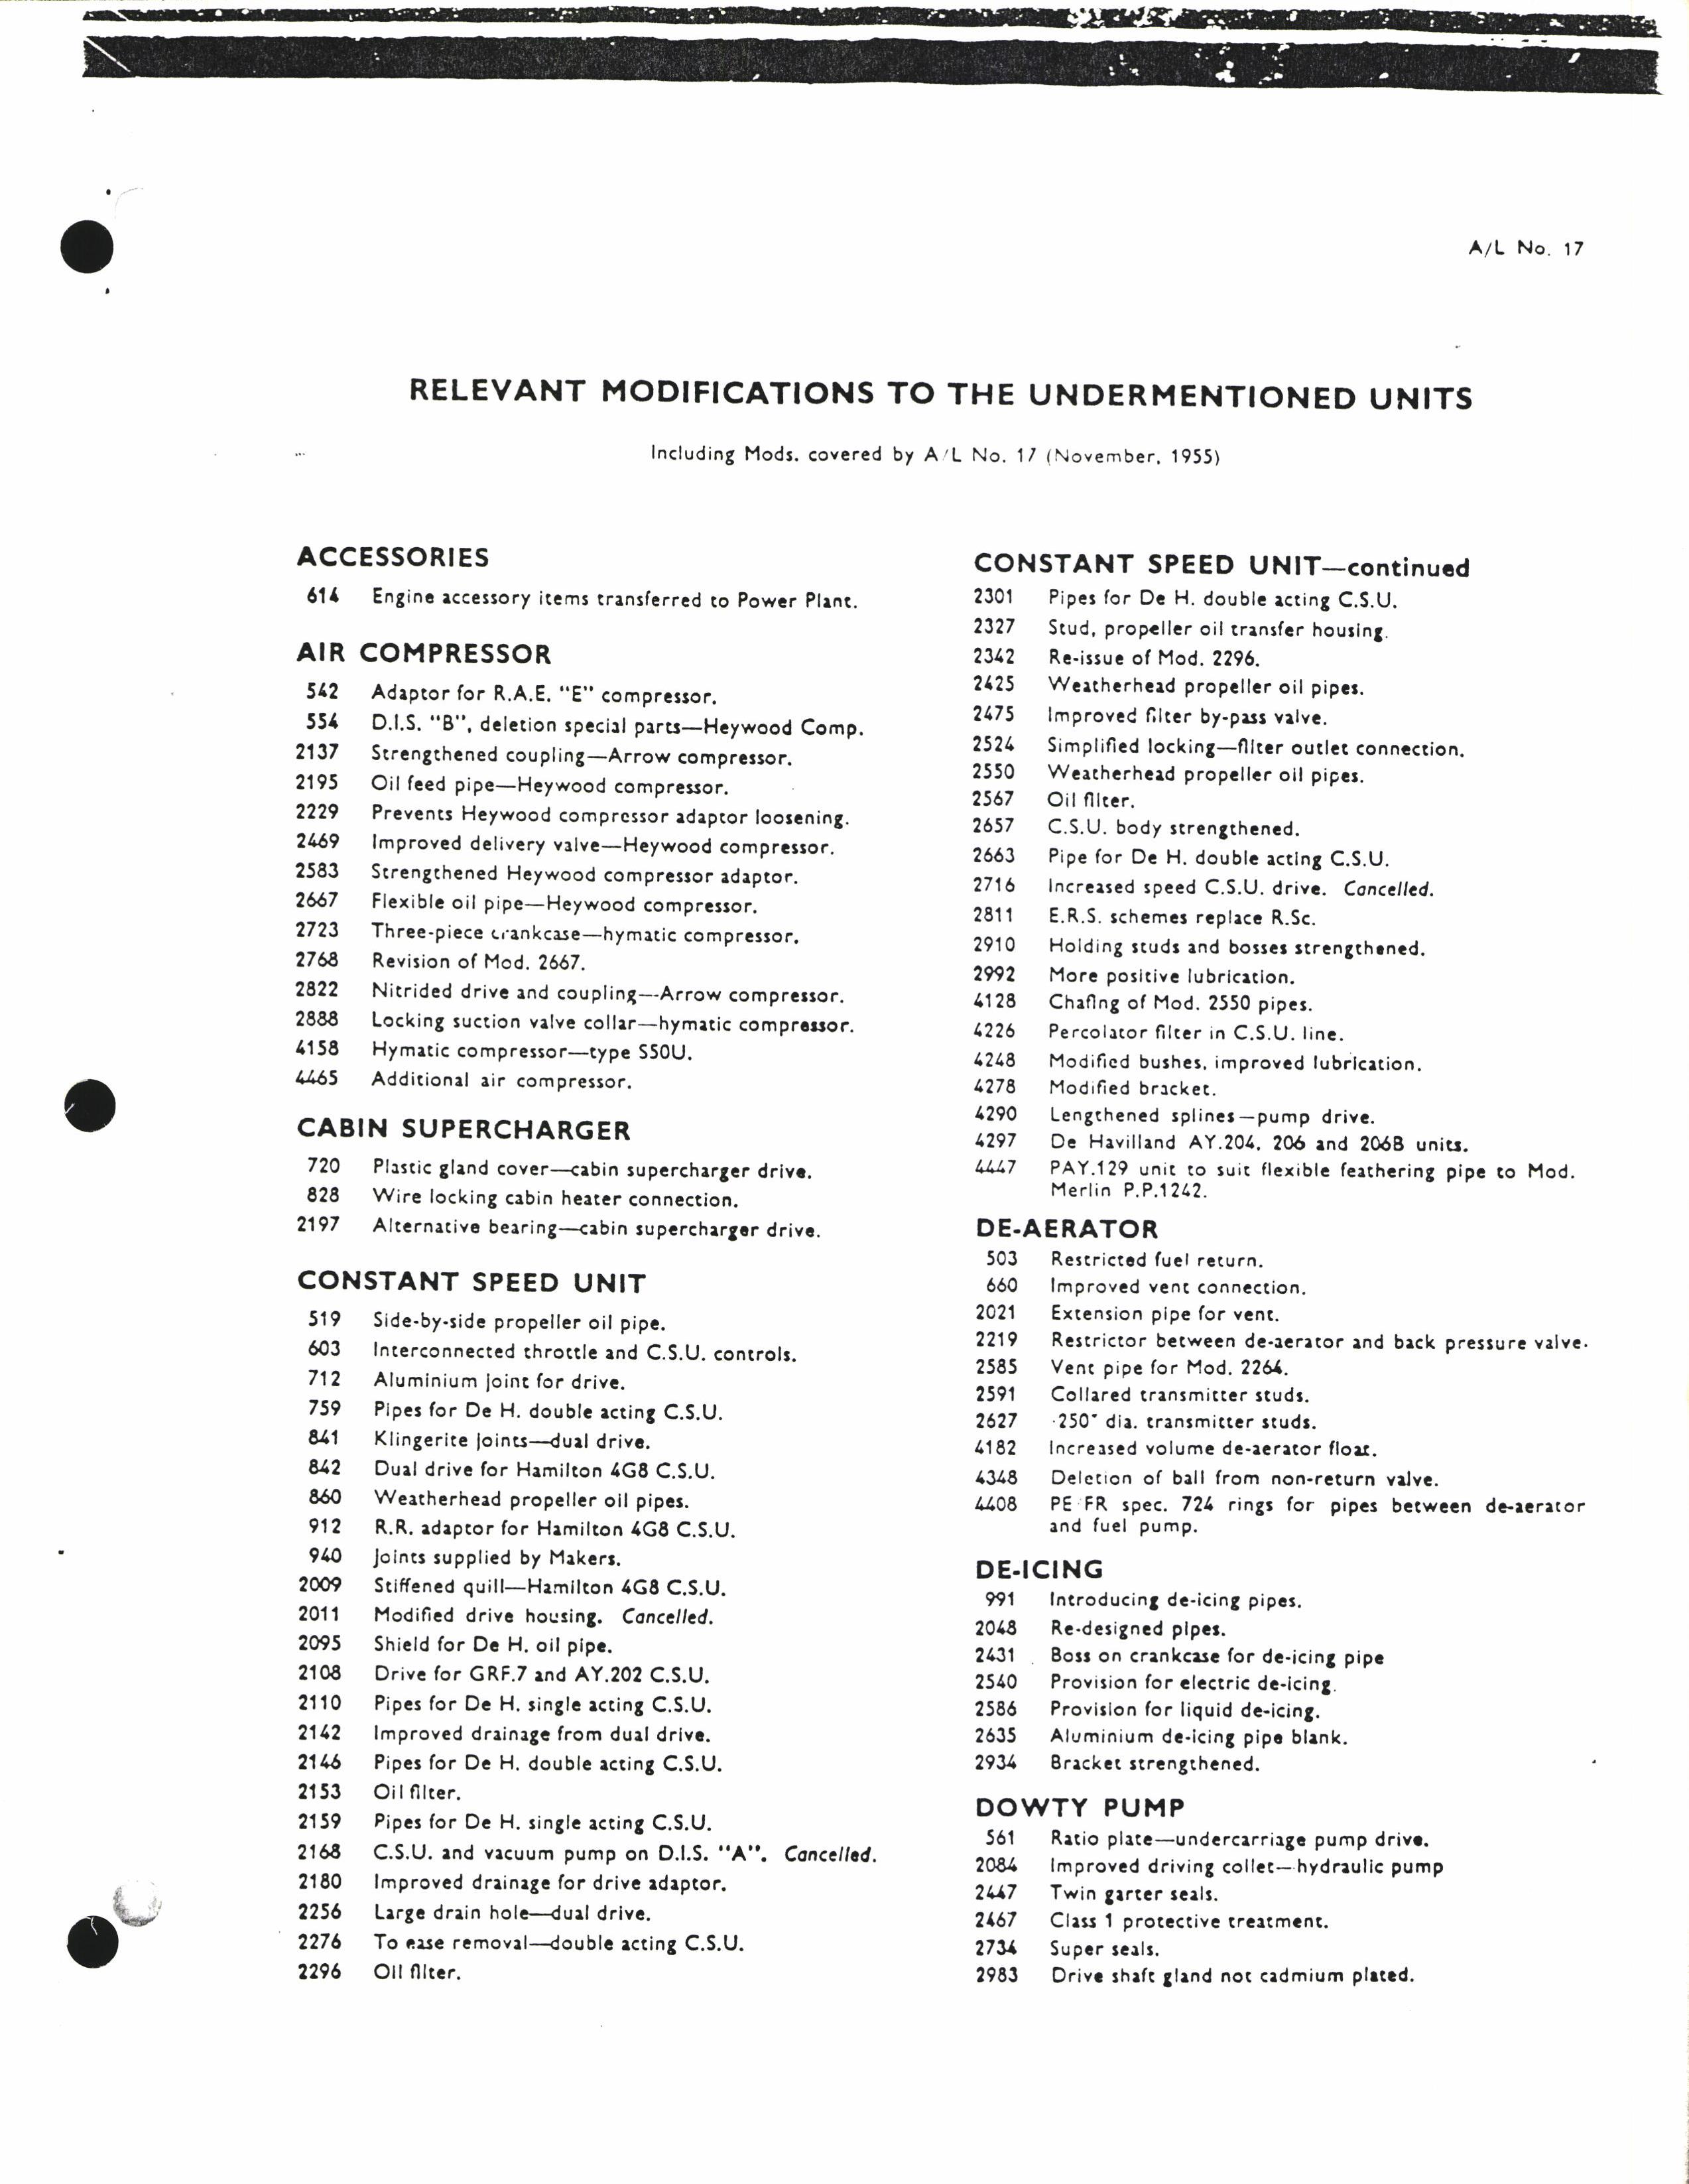 Sample page 11 from AirCorps Library document: Numerical List of Modifications to Rolls Royce Merlin Engines